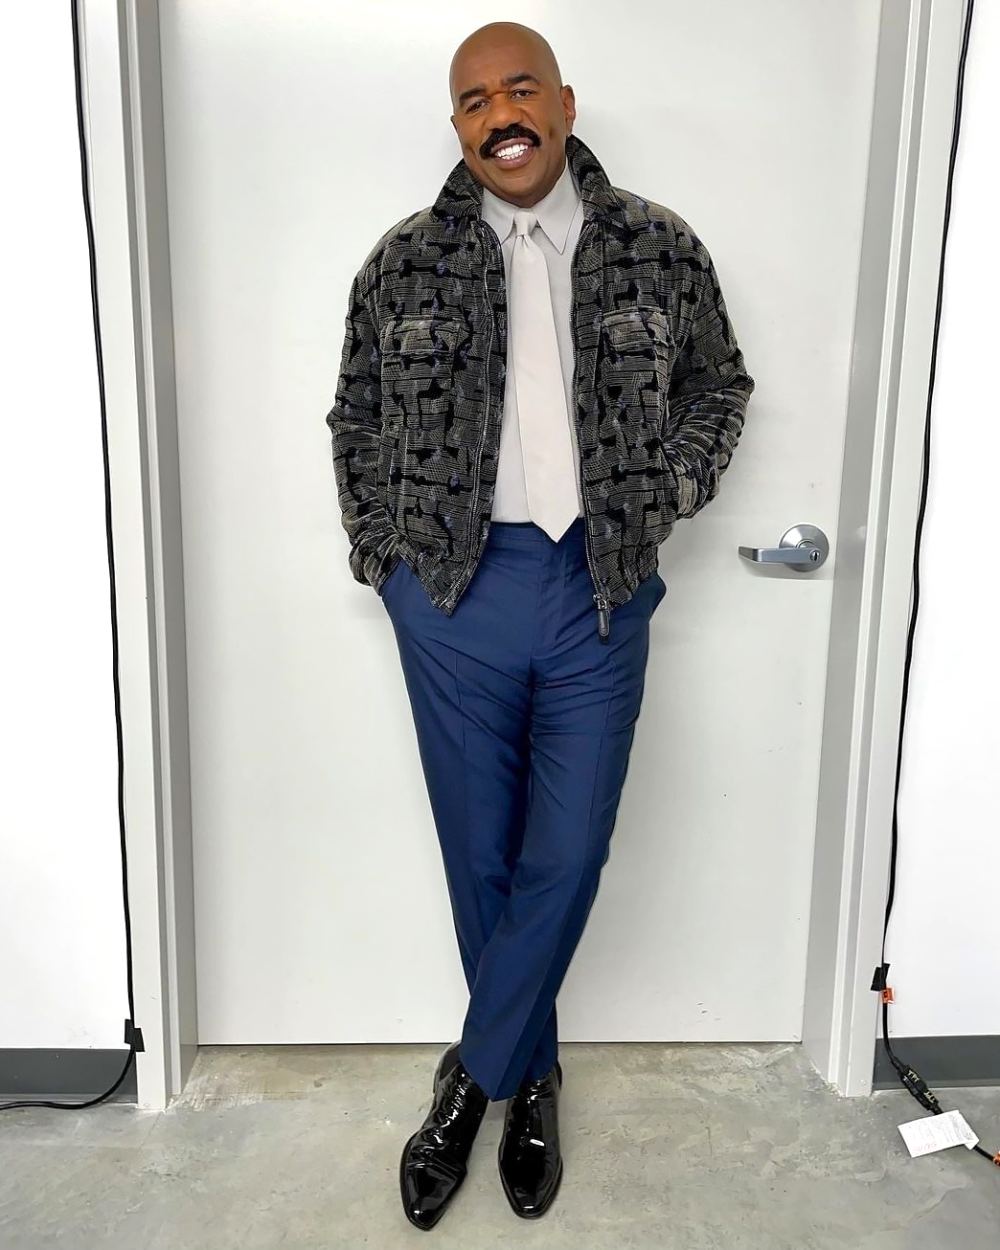 Steve Harvey, 64, Is Determined to Keep His Outfits Trendy: ‘I Don’t Want to Dress Old’